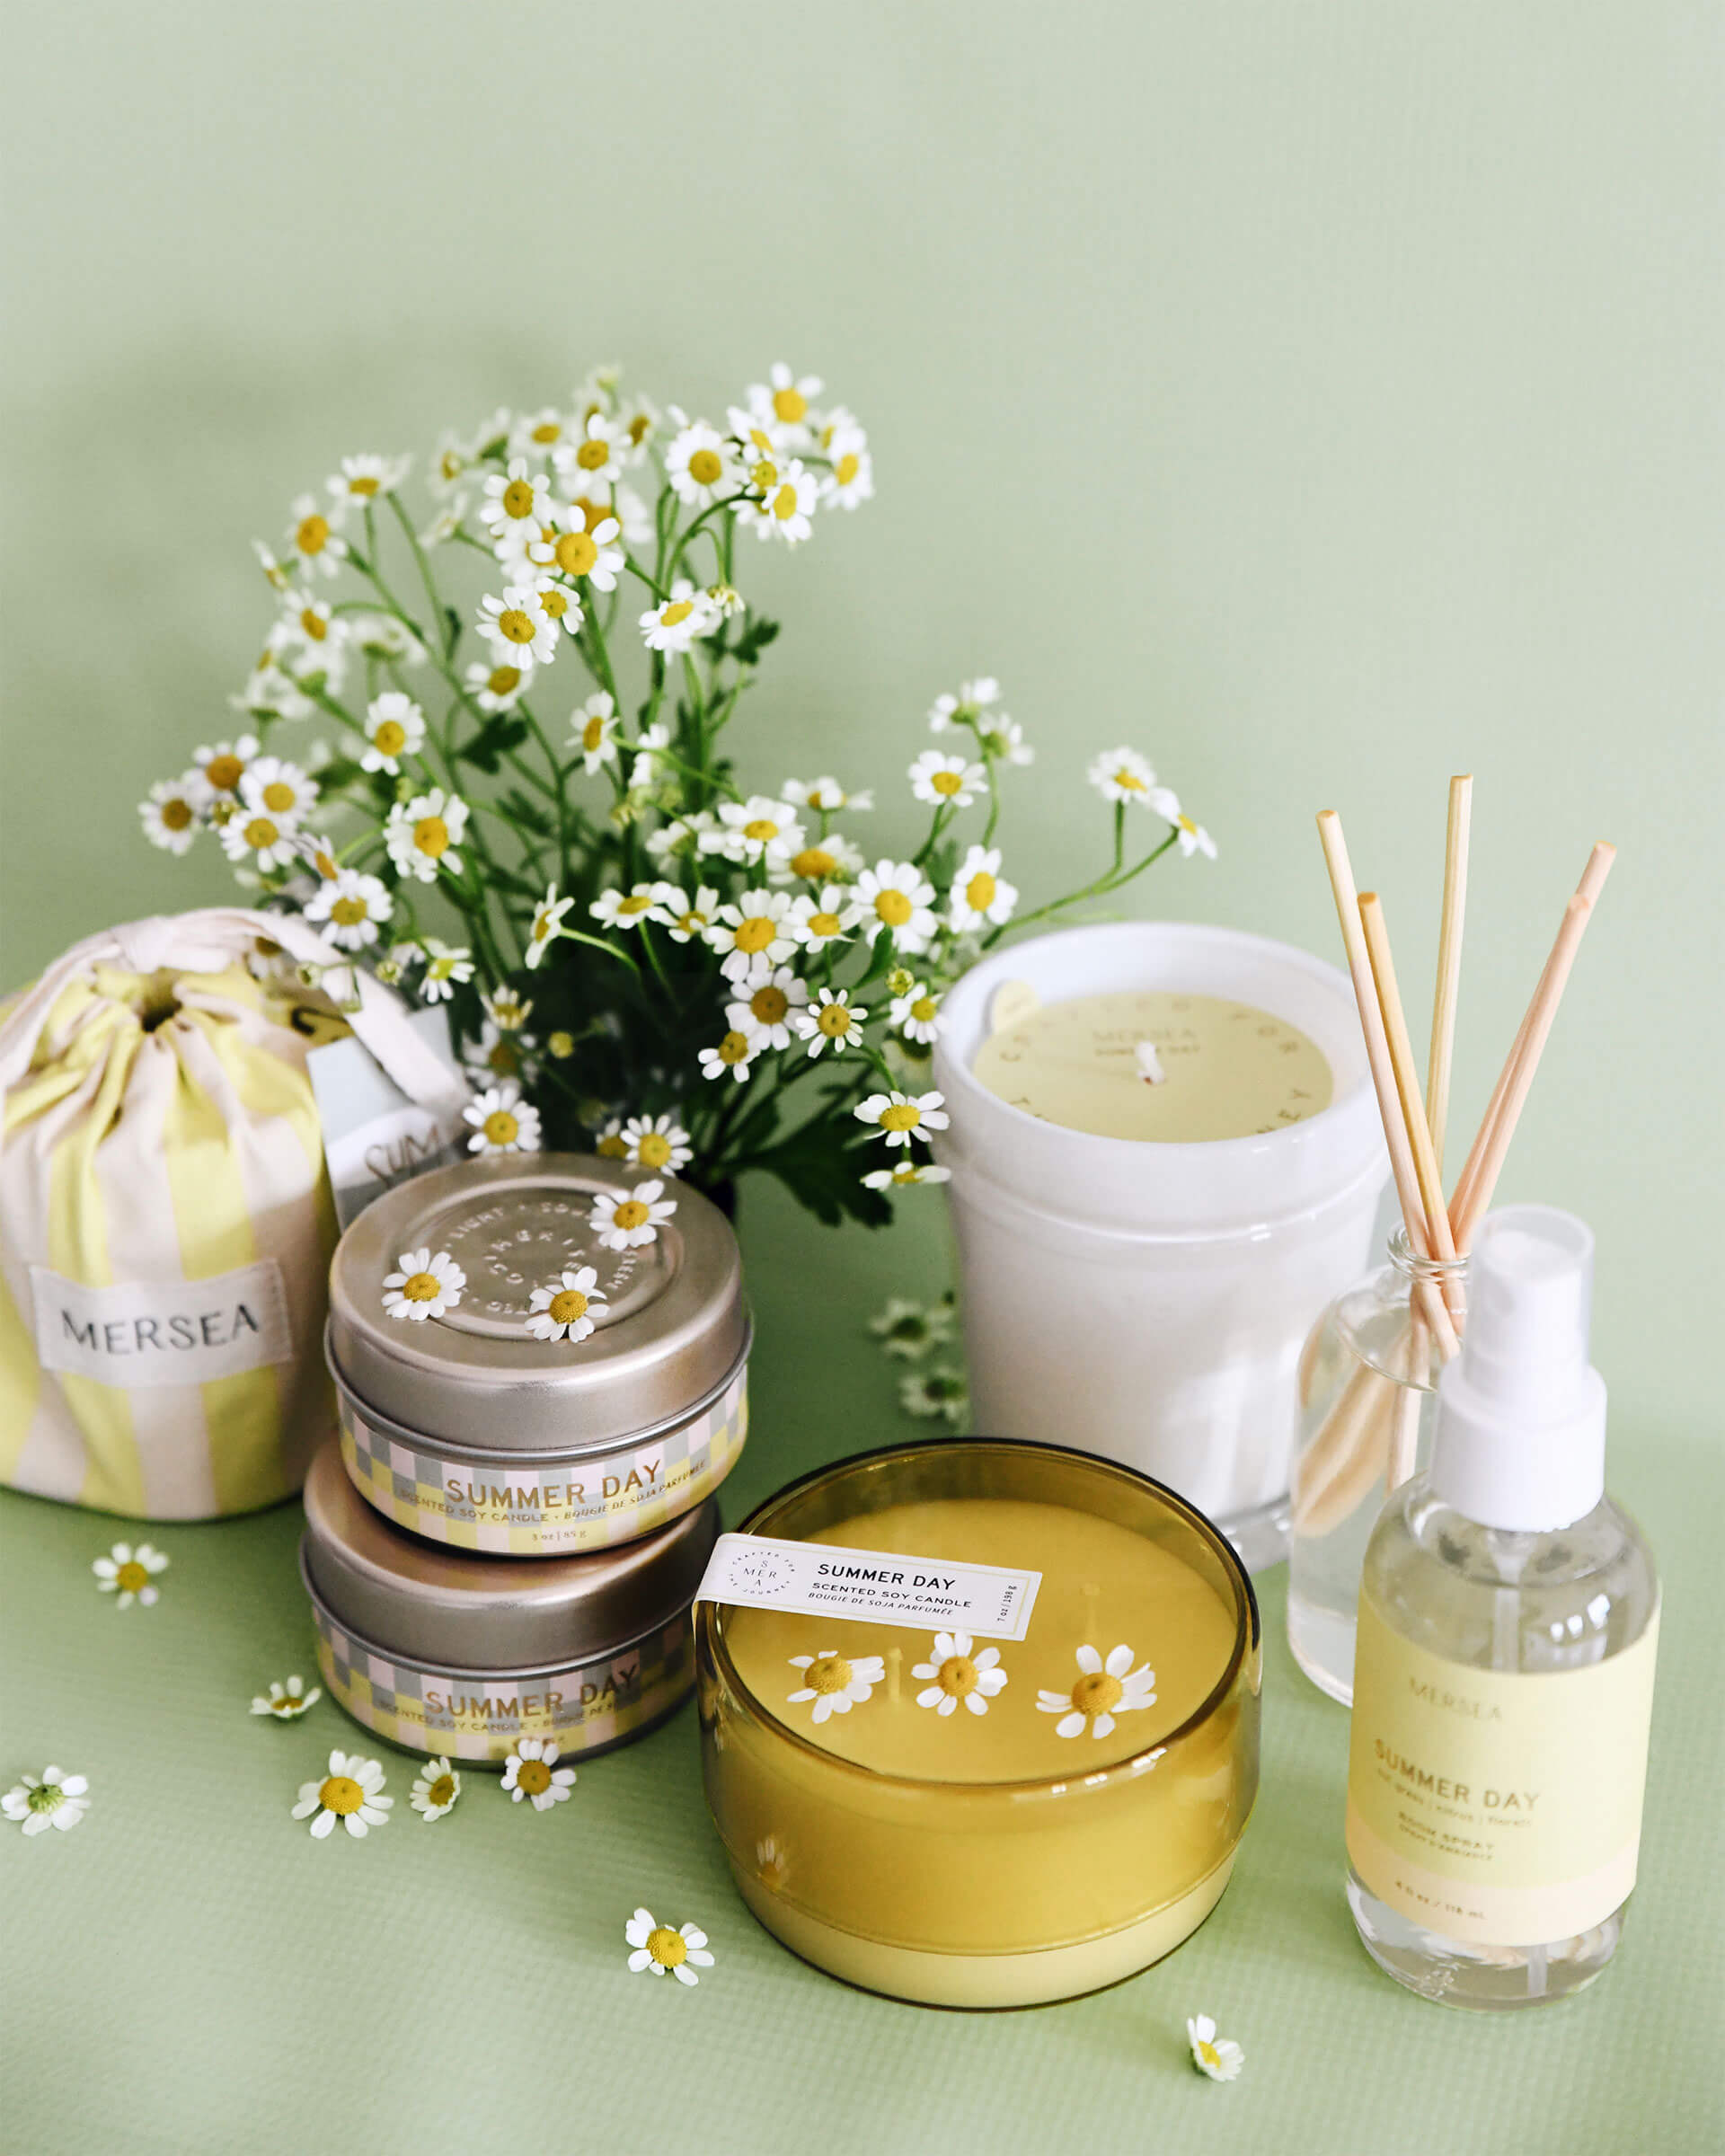 Summer Day scented collection of candles, room spray and diffuser in front of yellow background